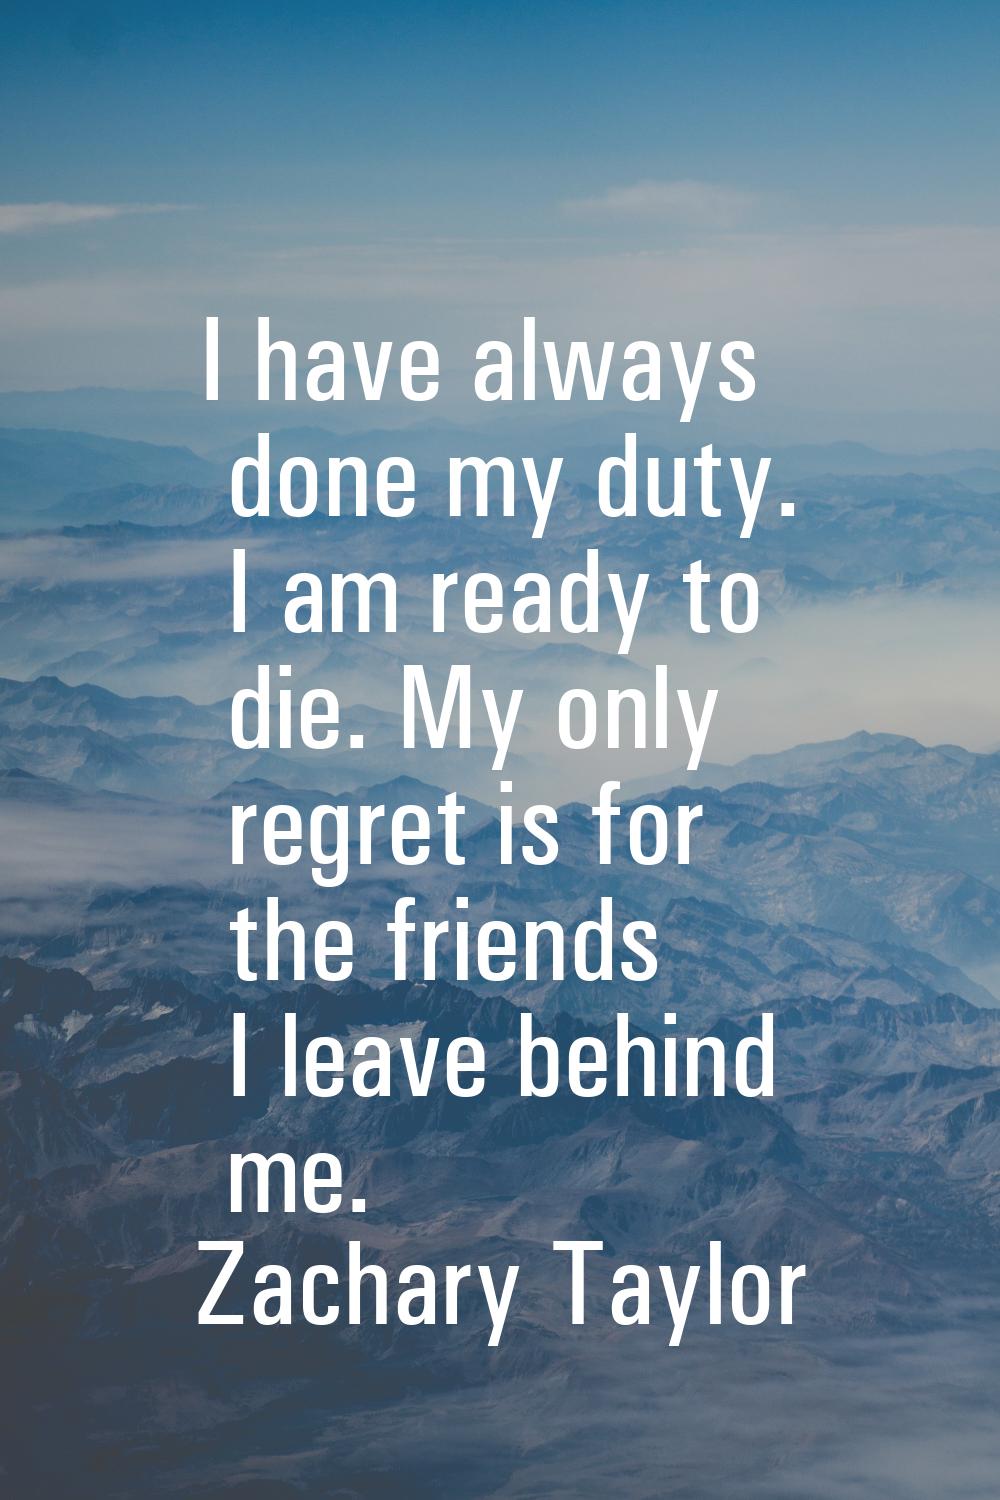 I have always done my duty. I am ready to die. My only regret is for the friends I leave behind me.